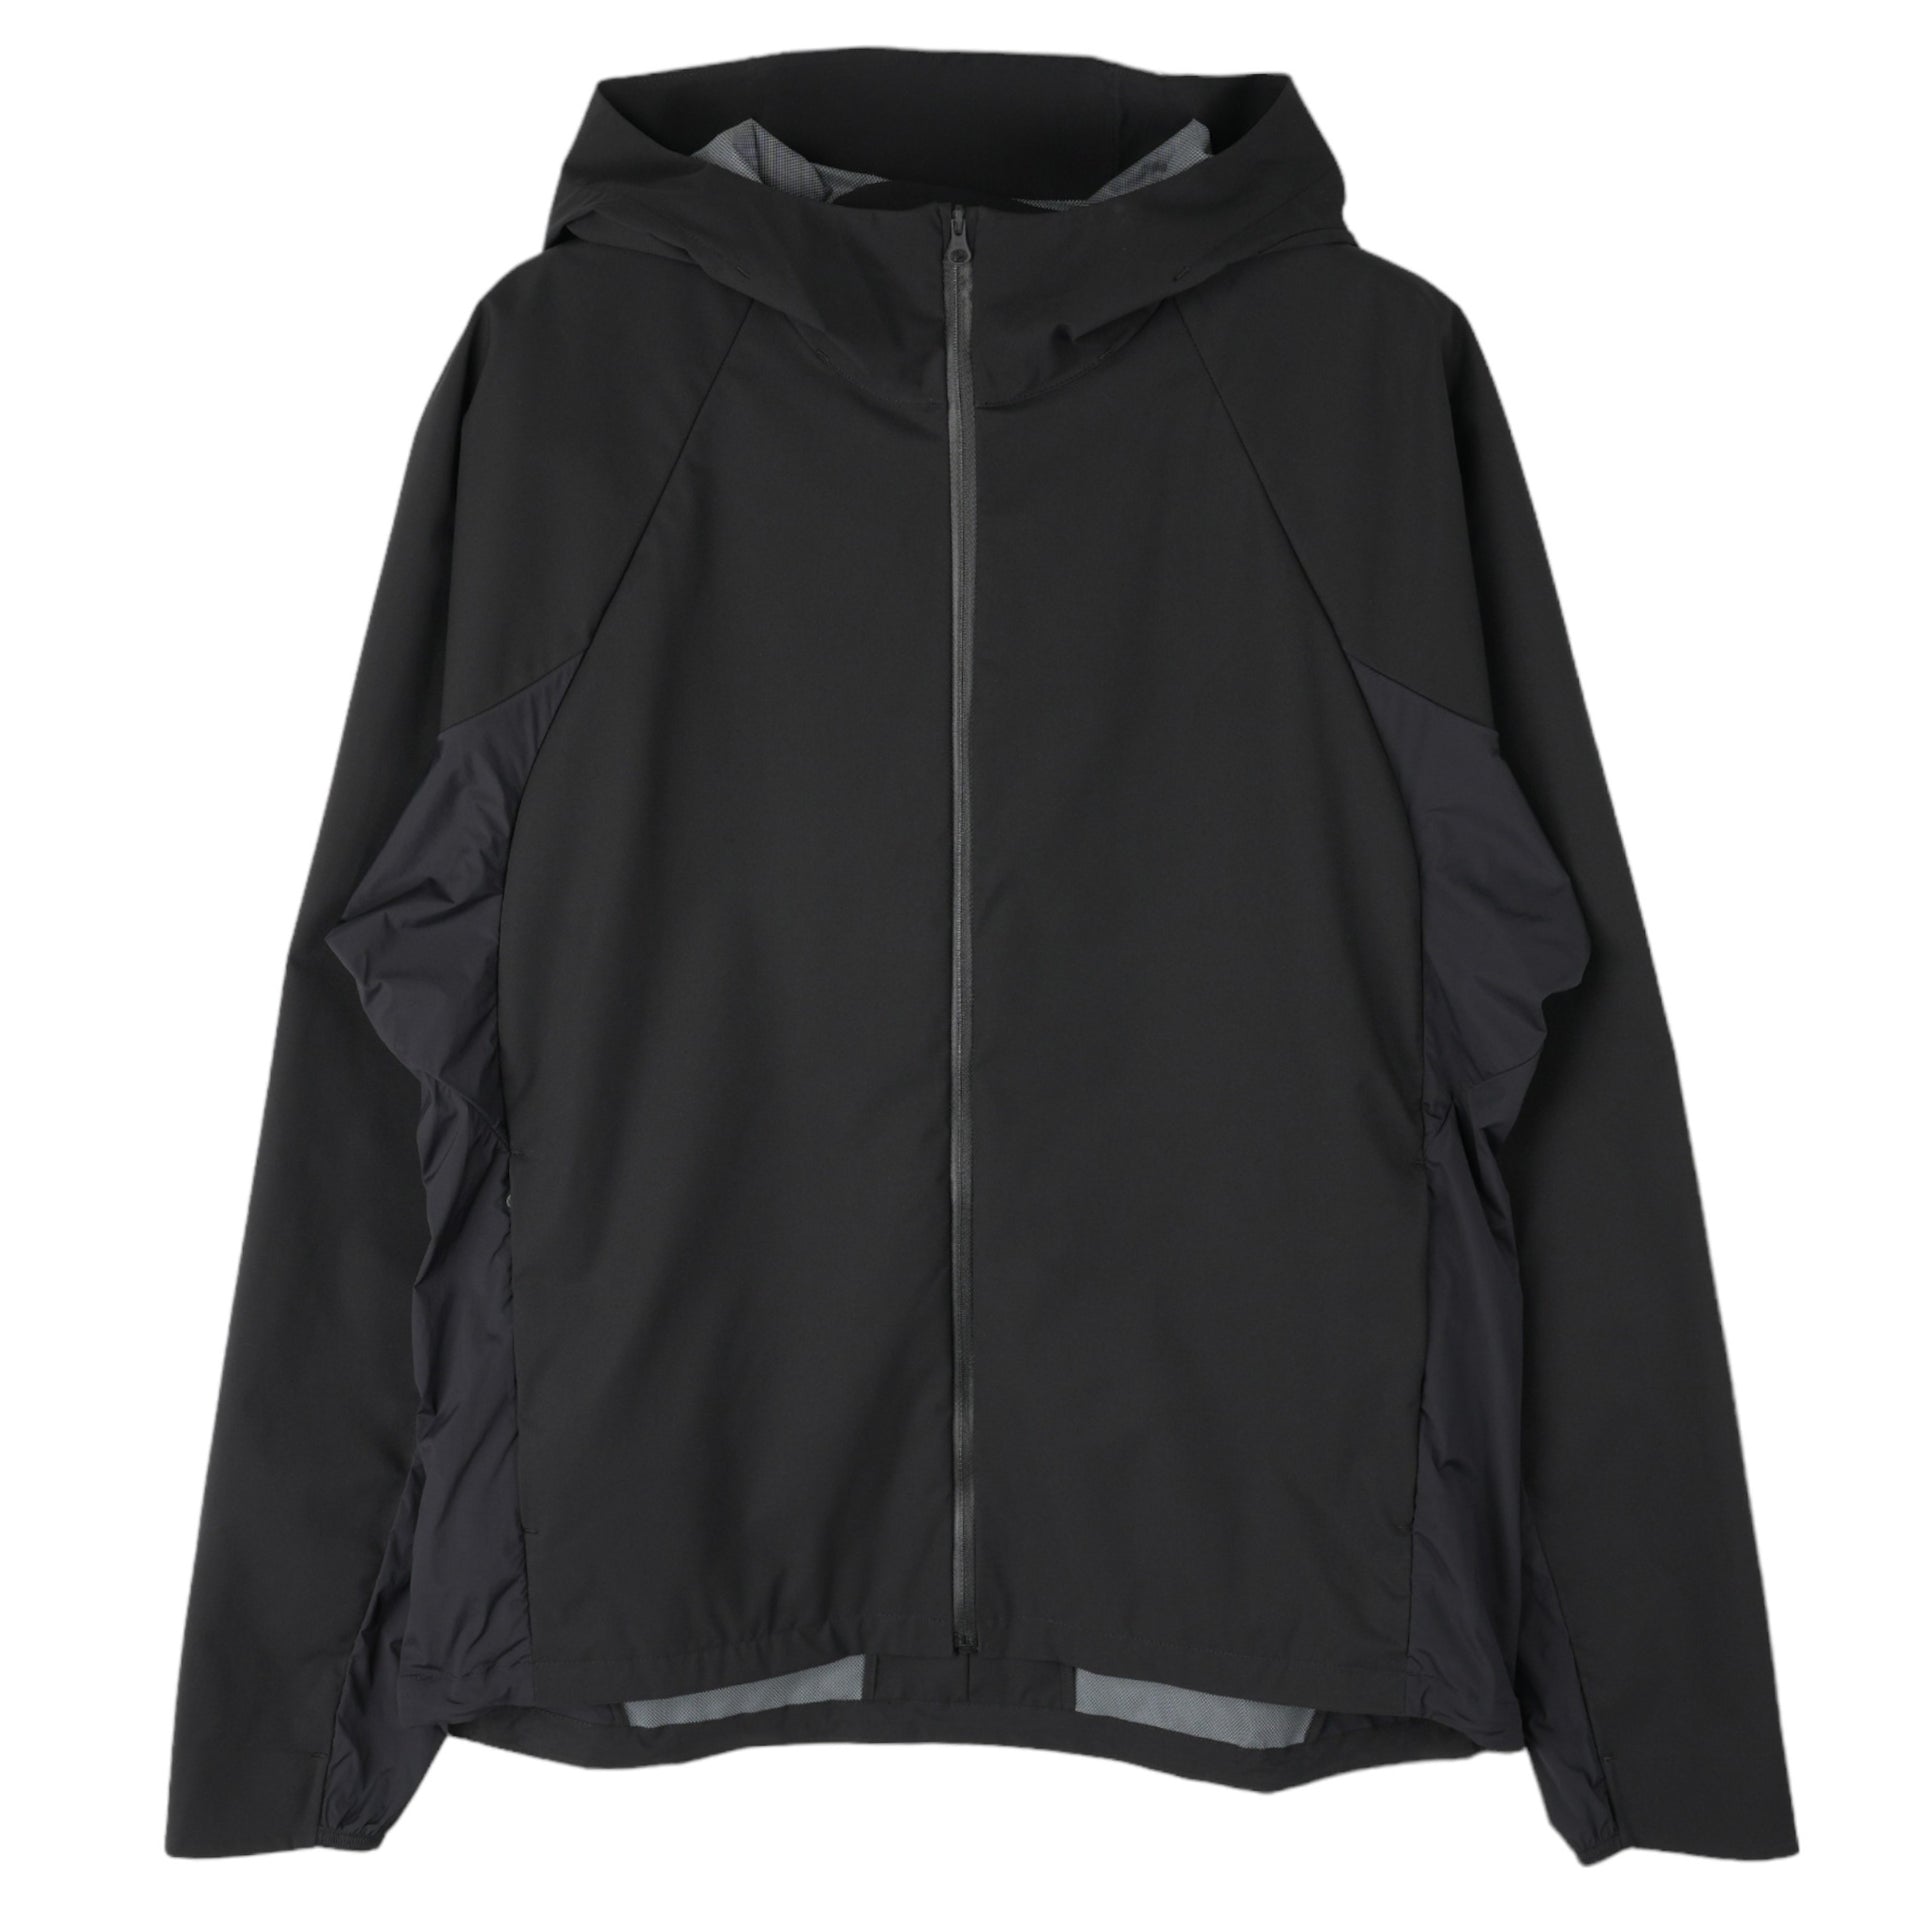 6.0 TECHNICAL JACKET RIGHT / BLACK